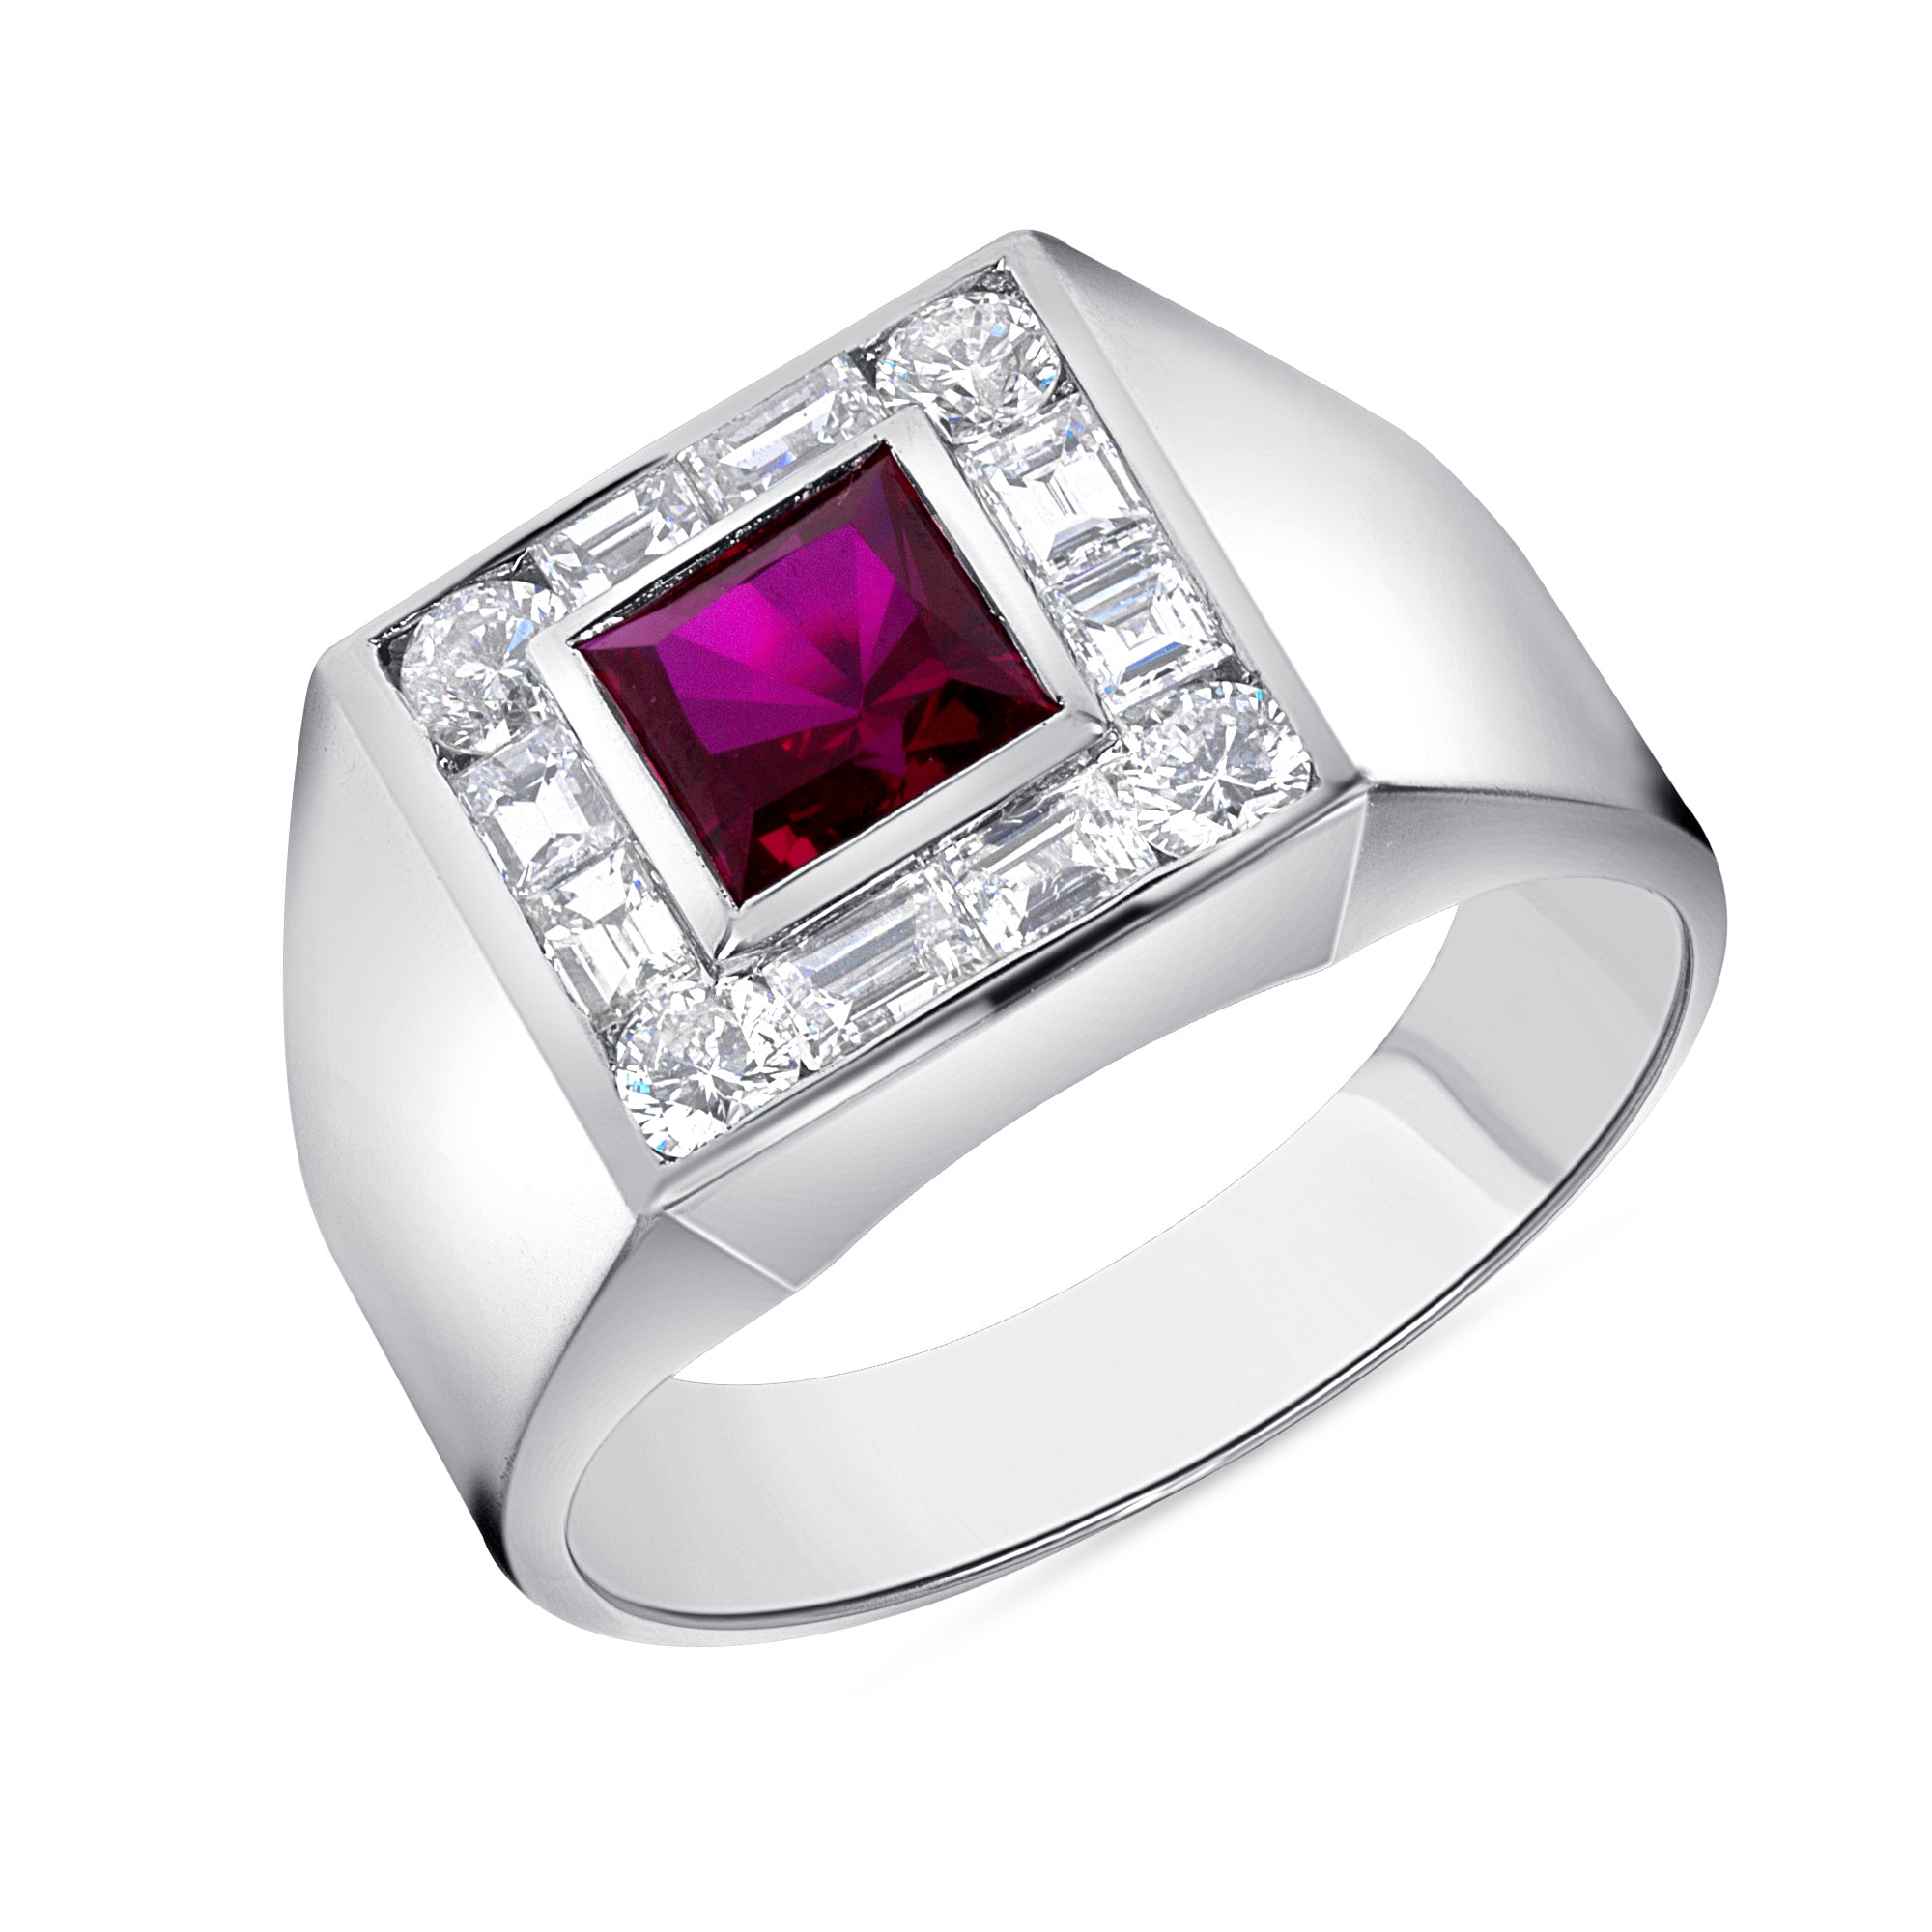 Princess Cut Ruby and Channel Set Diamond Ring in 14K White Gold